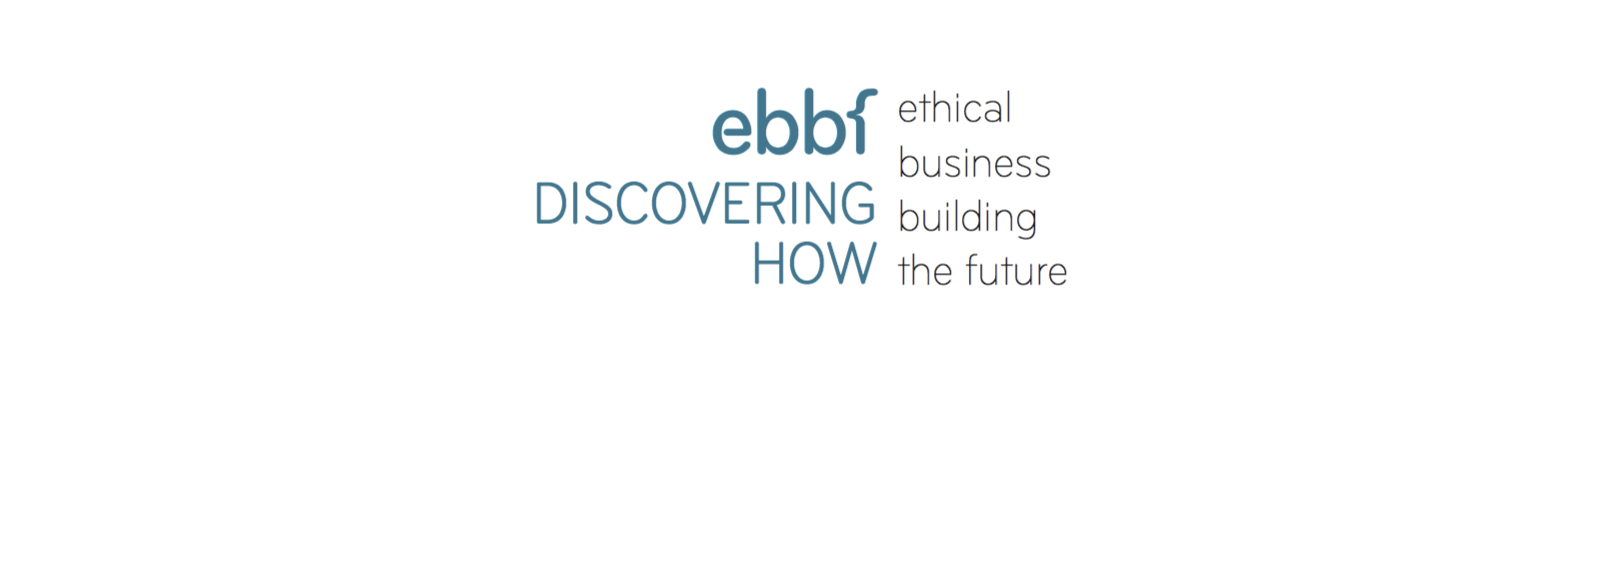 ethical business building the future #DiscoveringHow - ebbf’s podcast